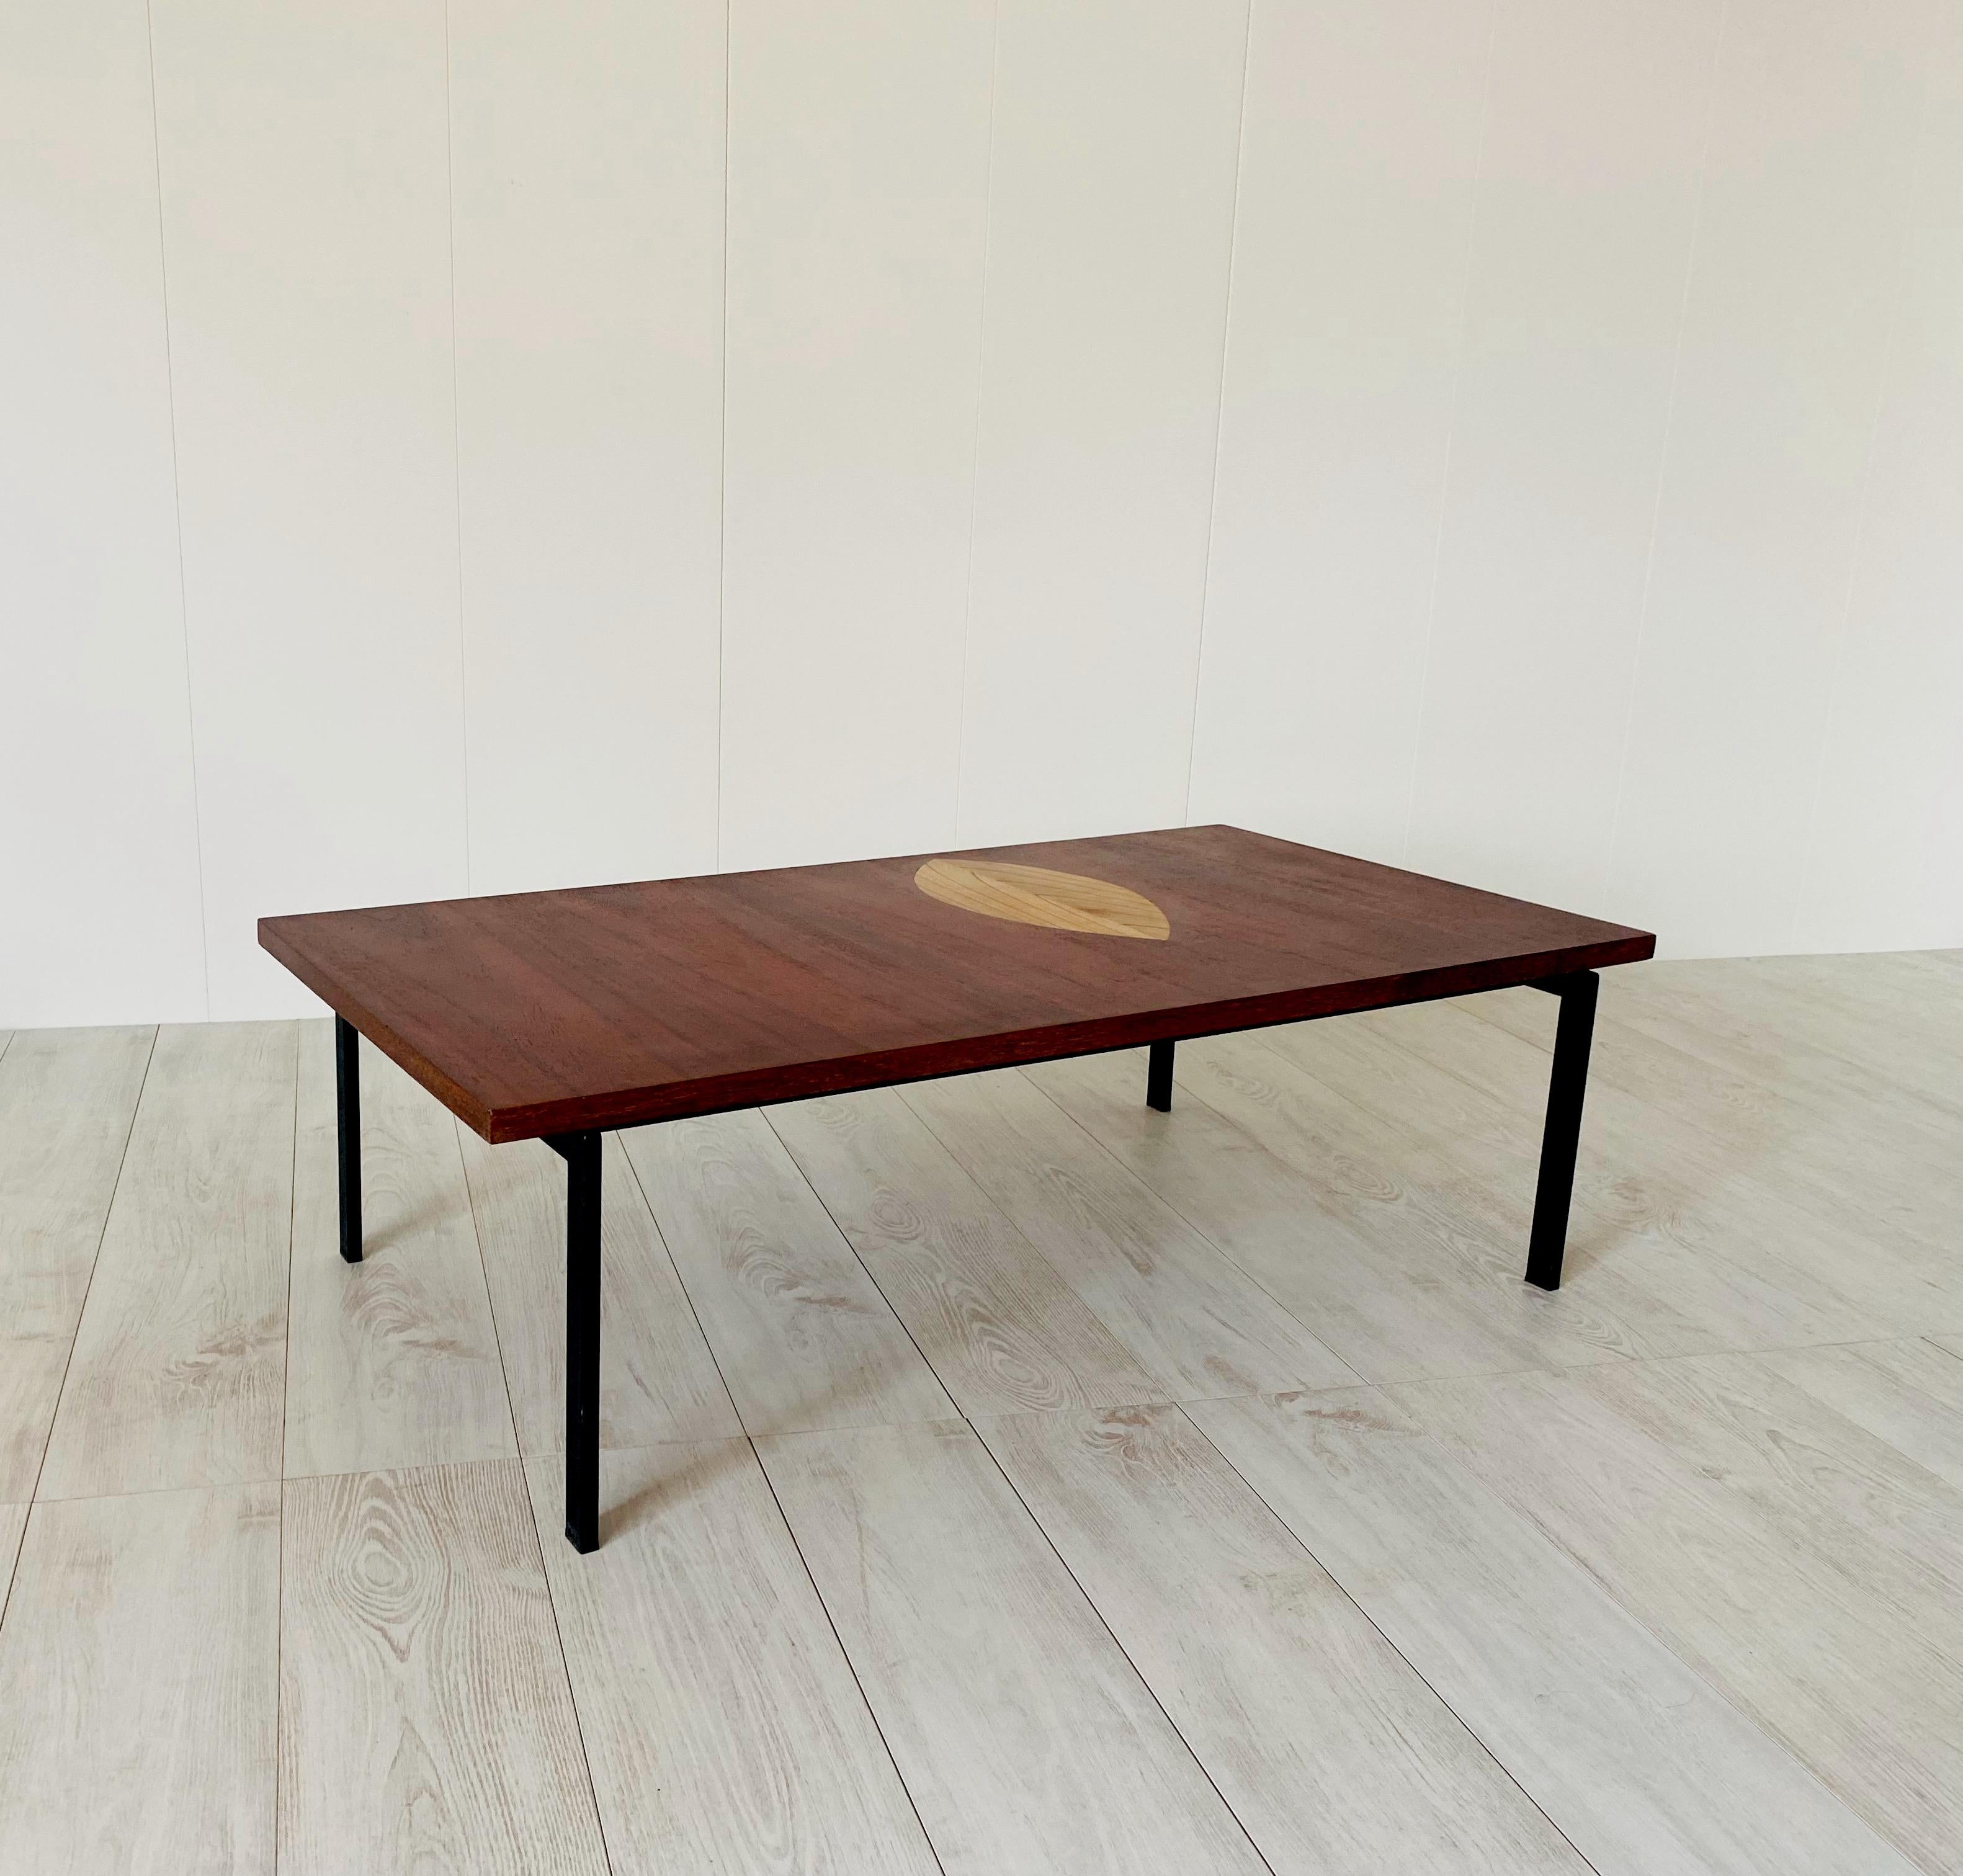 Coffee table by Tapio Wirkkala
Very good vintage conditions. 
Produced by Asko Finand around 1958
Manufacturer's brand under the top 